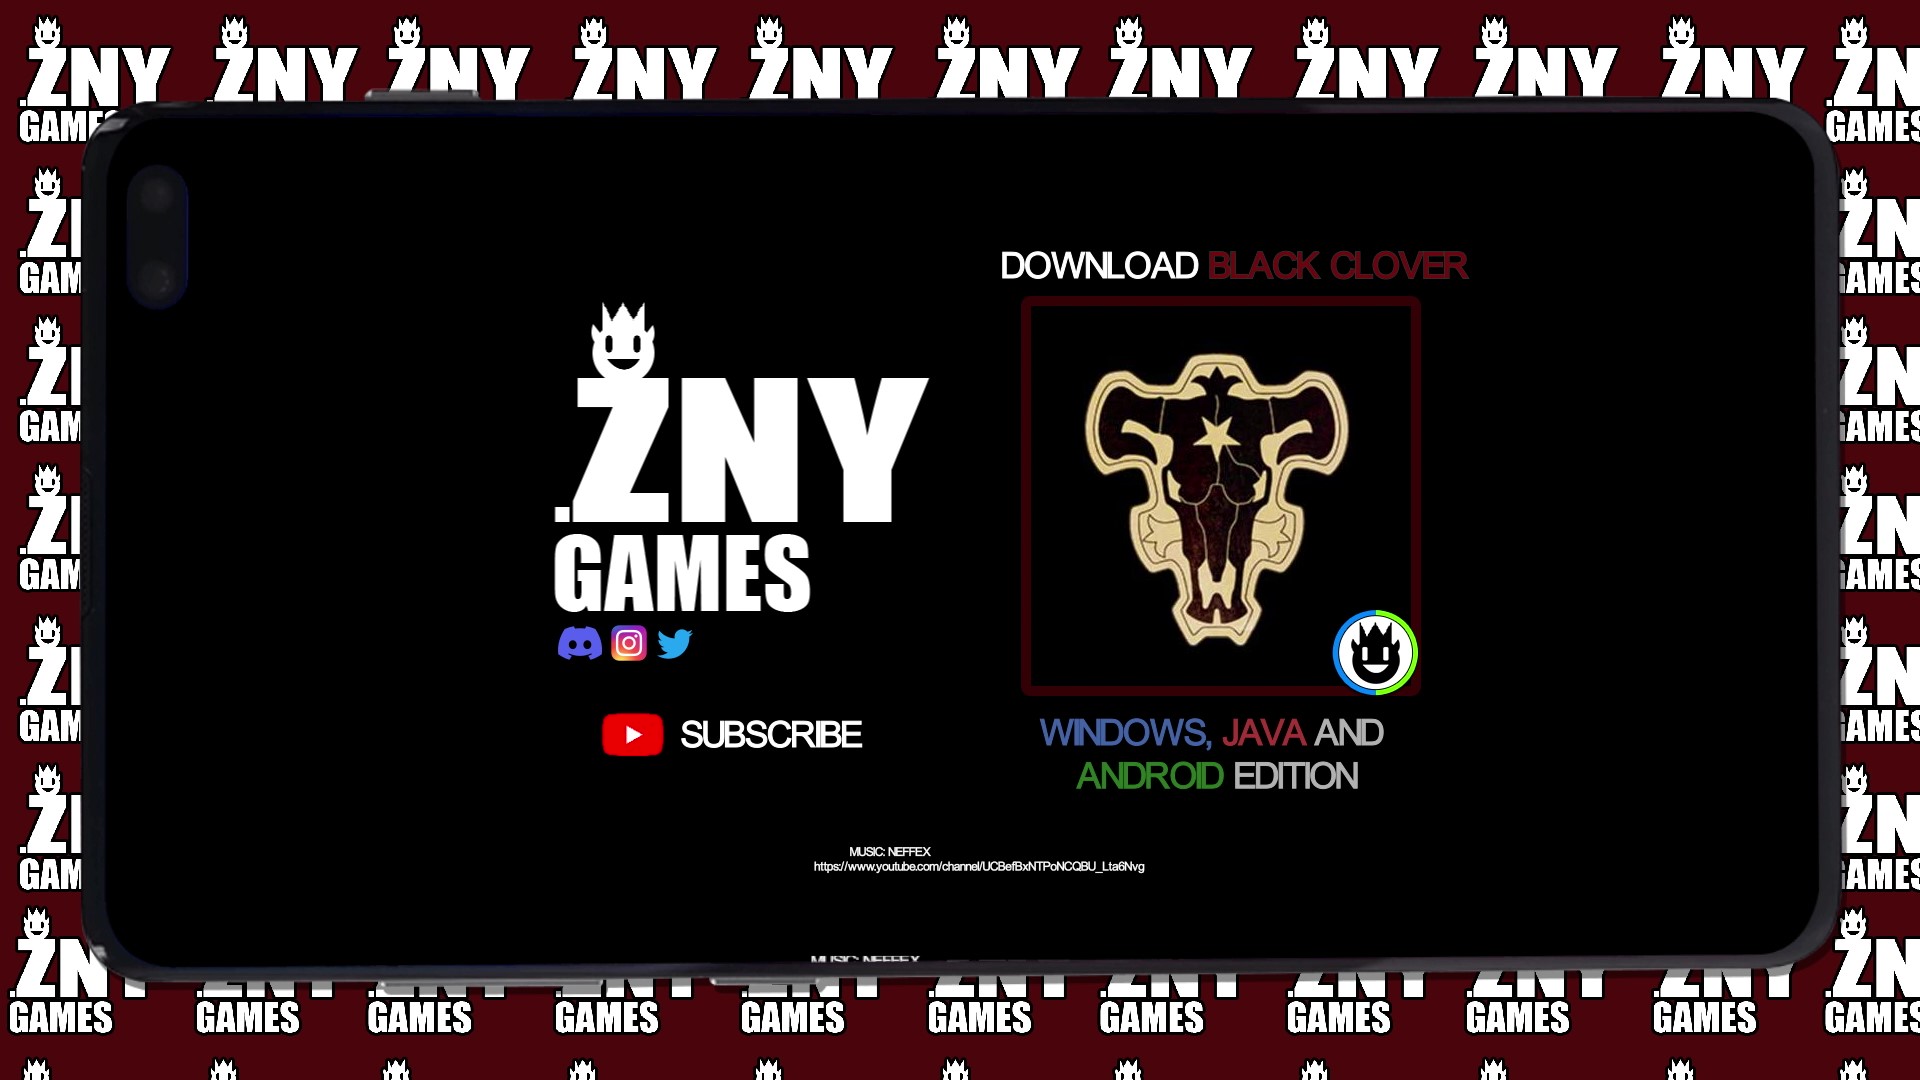 znygames themed gui texturepack black clover pocket edition - download